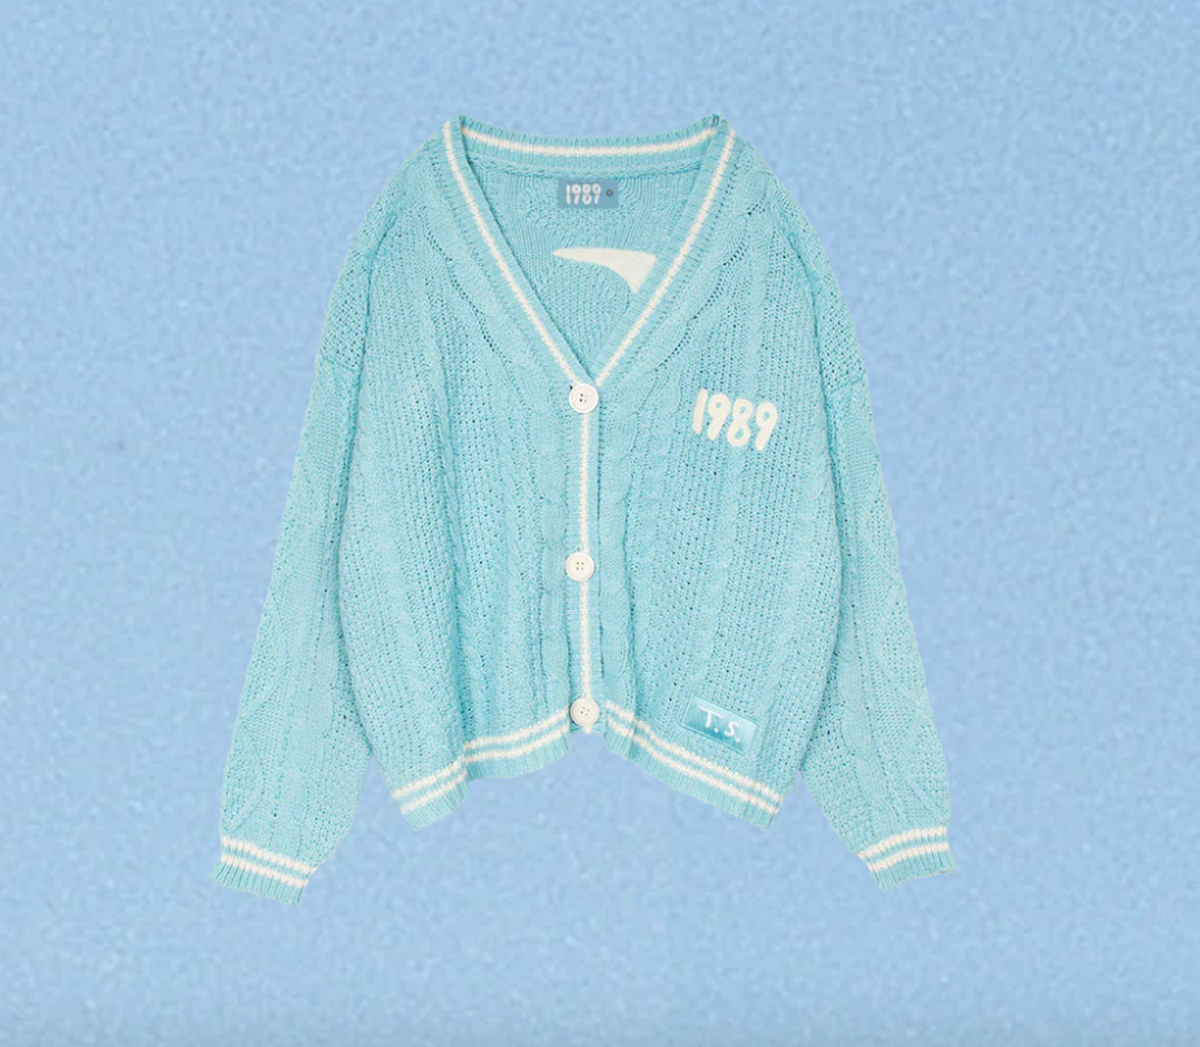 Taylor Swift Just Released A "1989 (Taylor's Version)" Cardigan